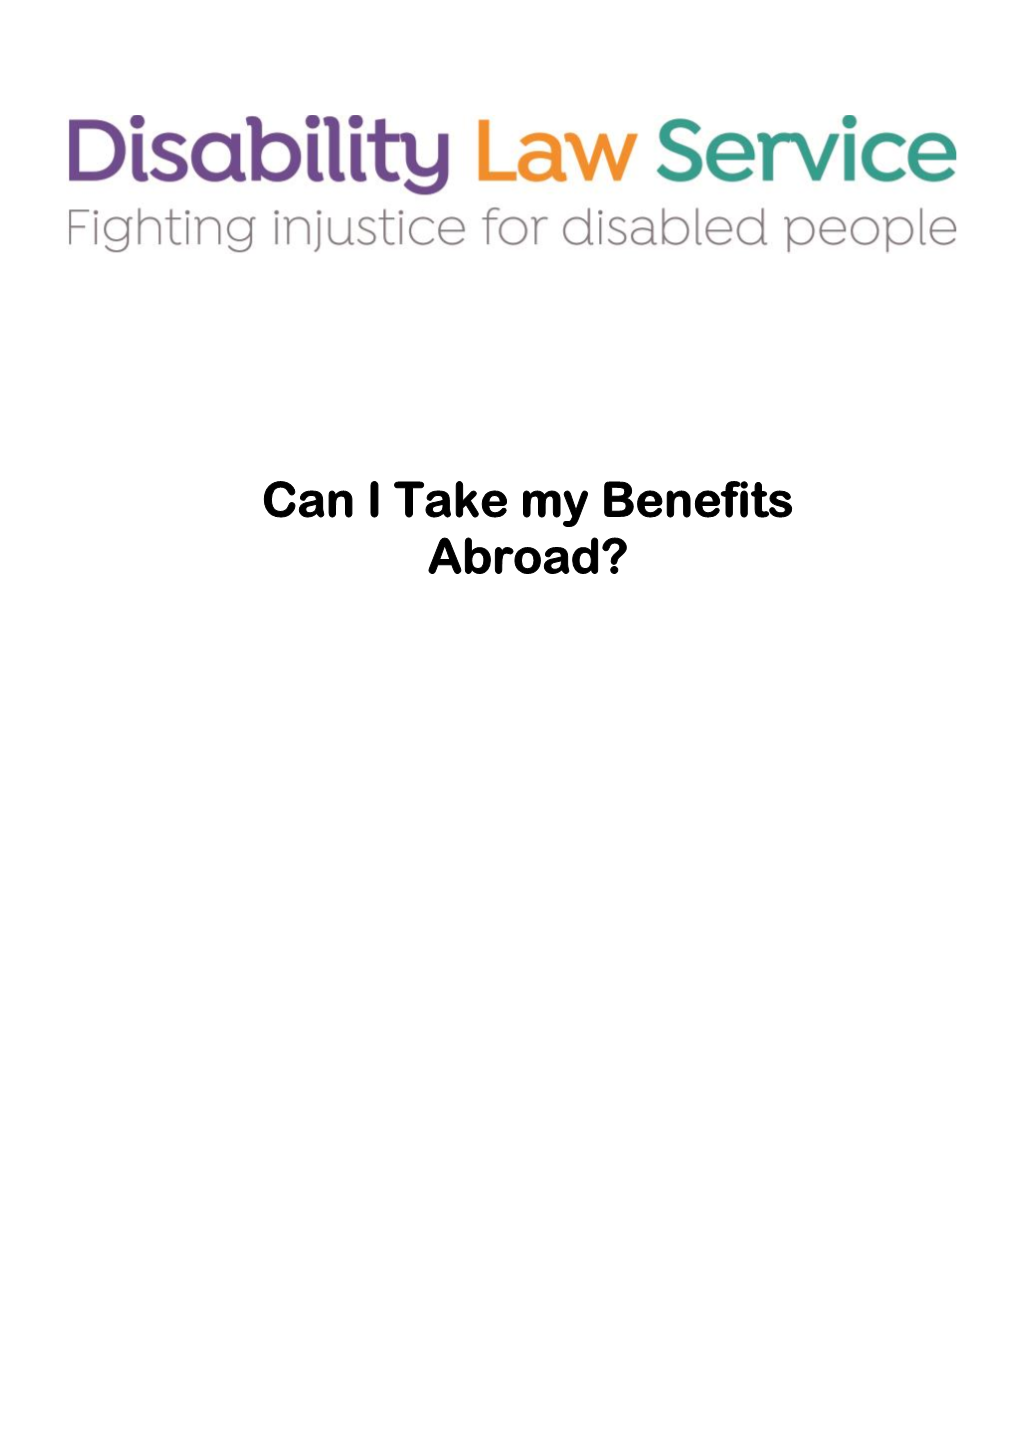 Can I Take My Benefits Abroad?